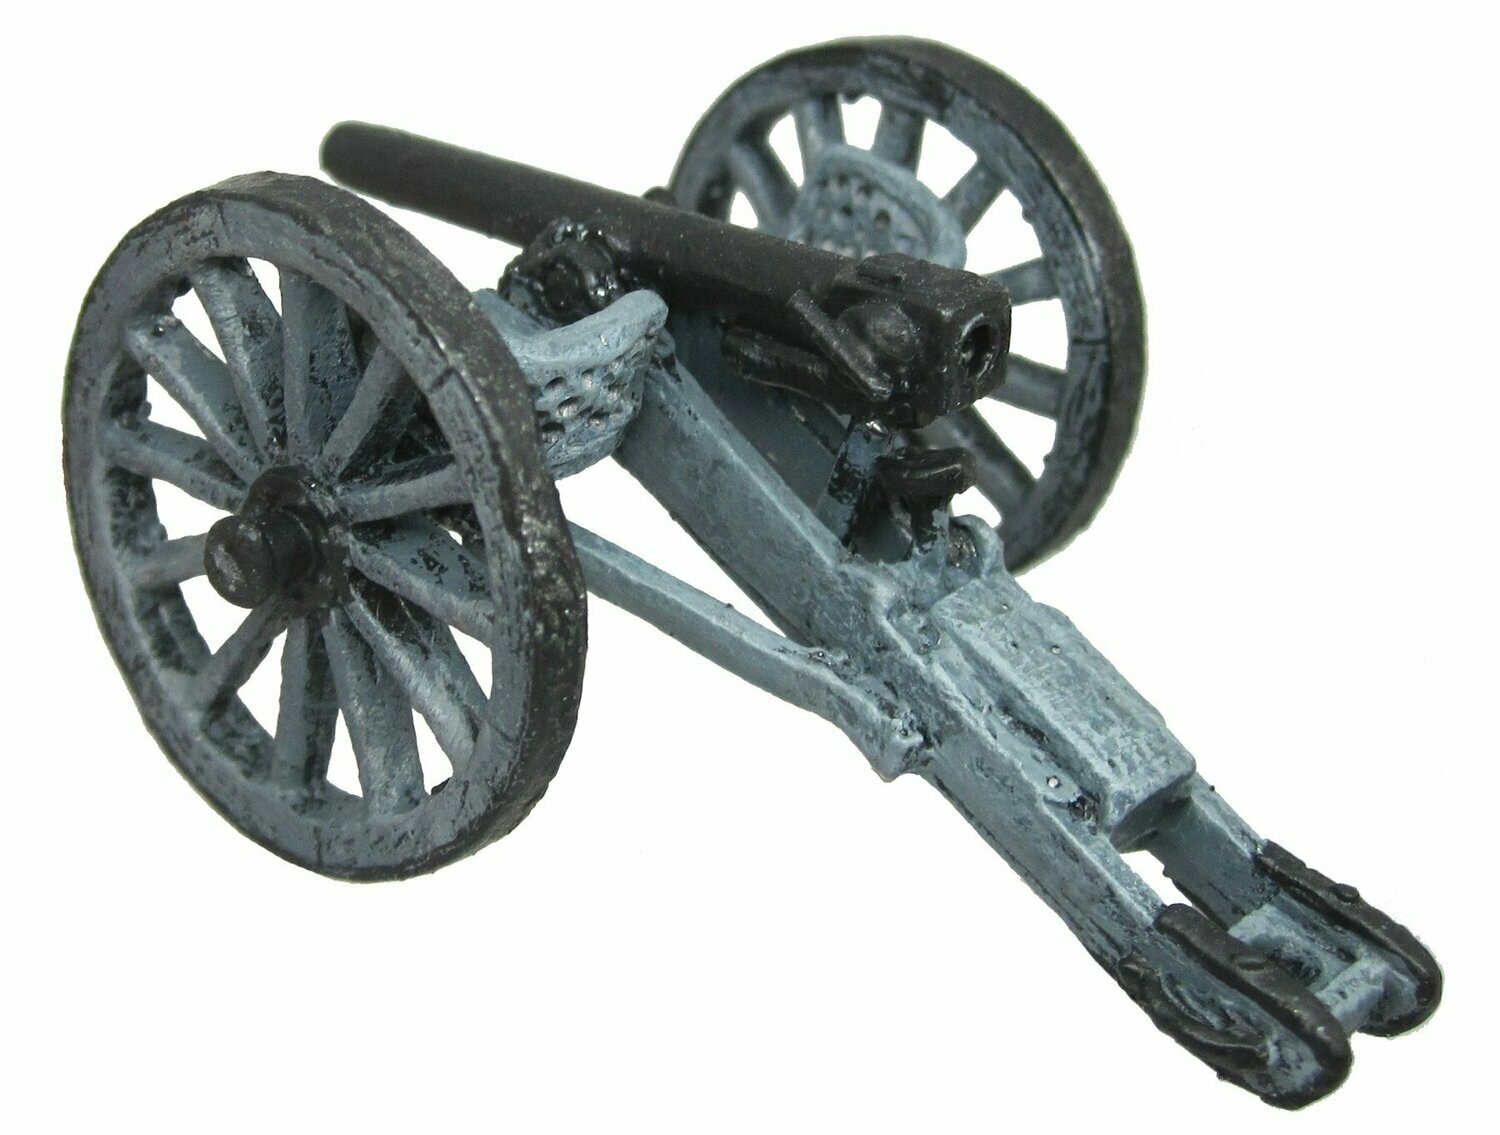 28mm FPW Krupp Cannon